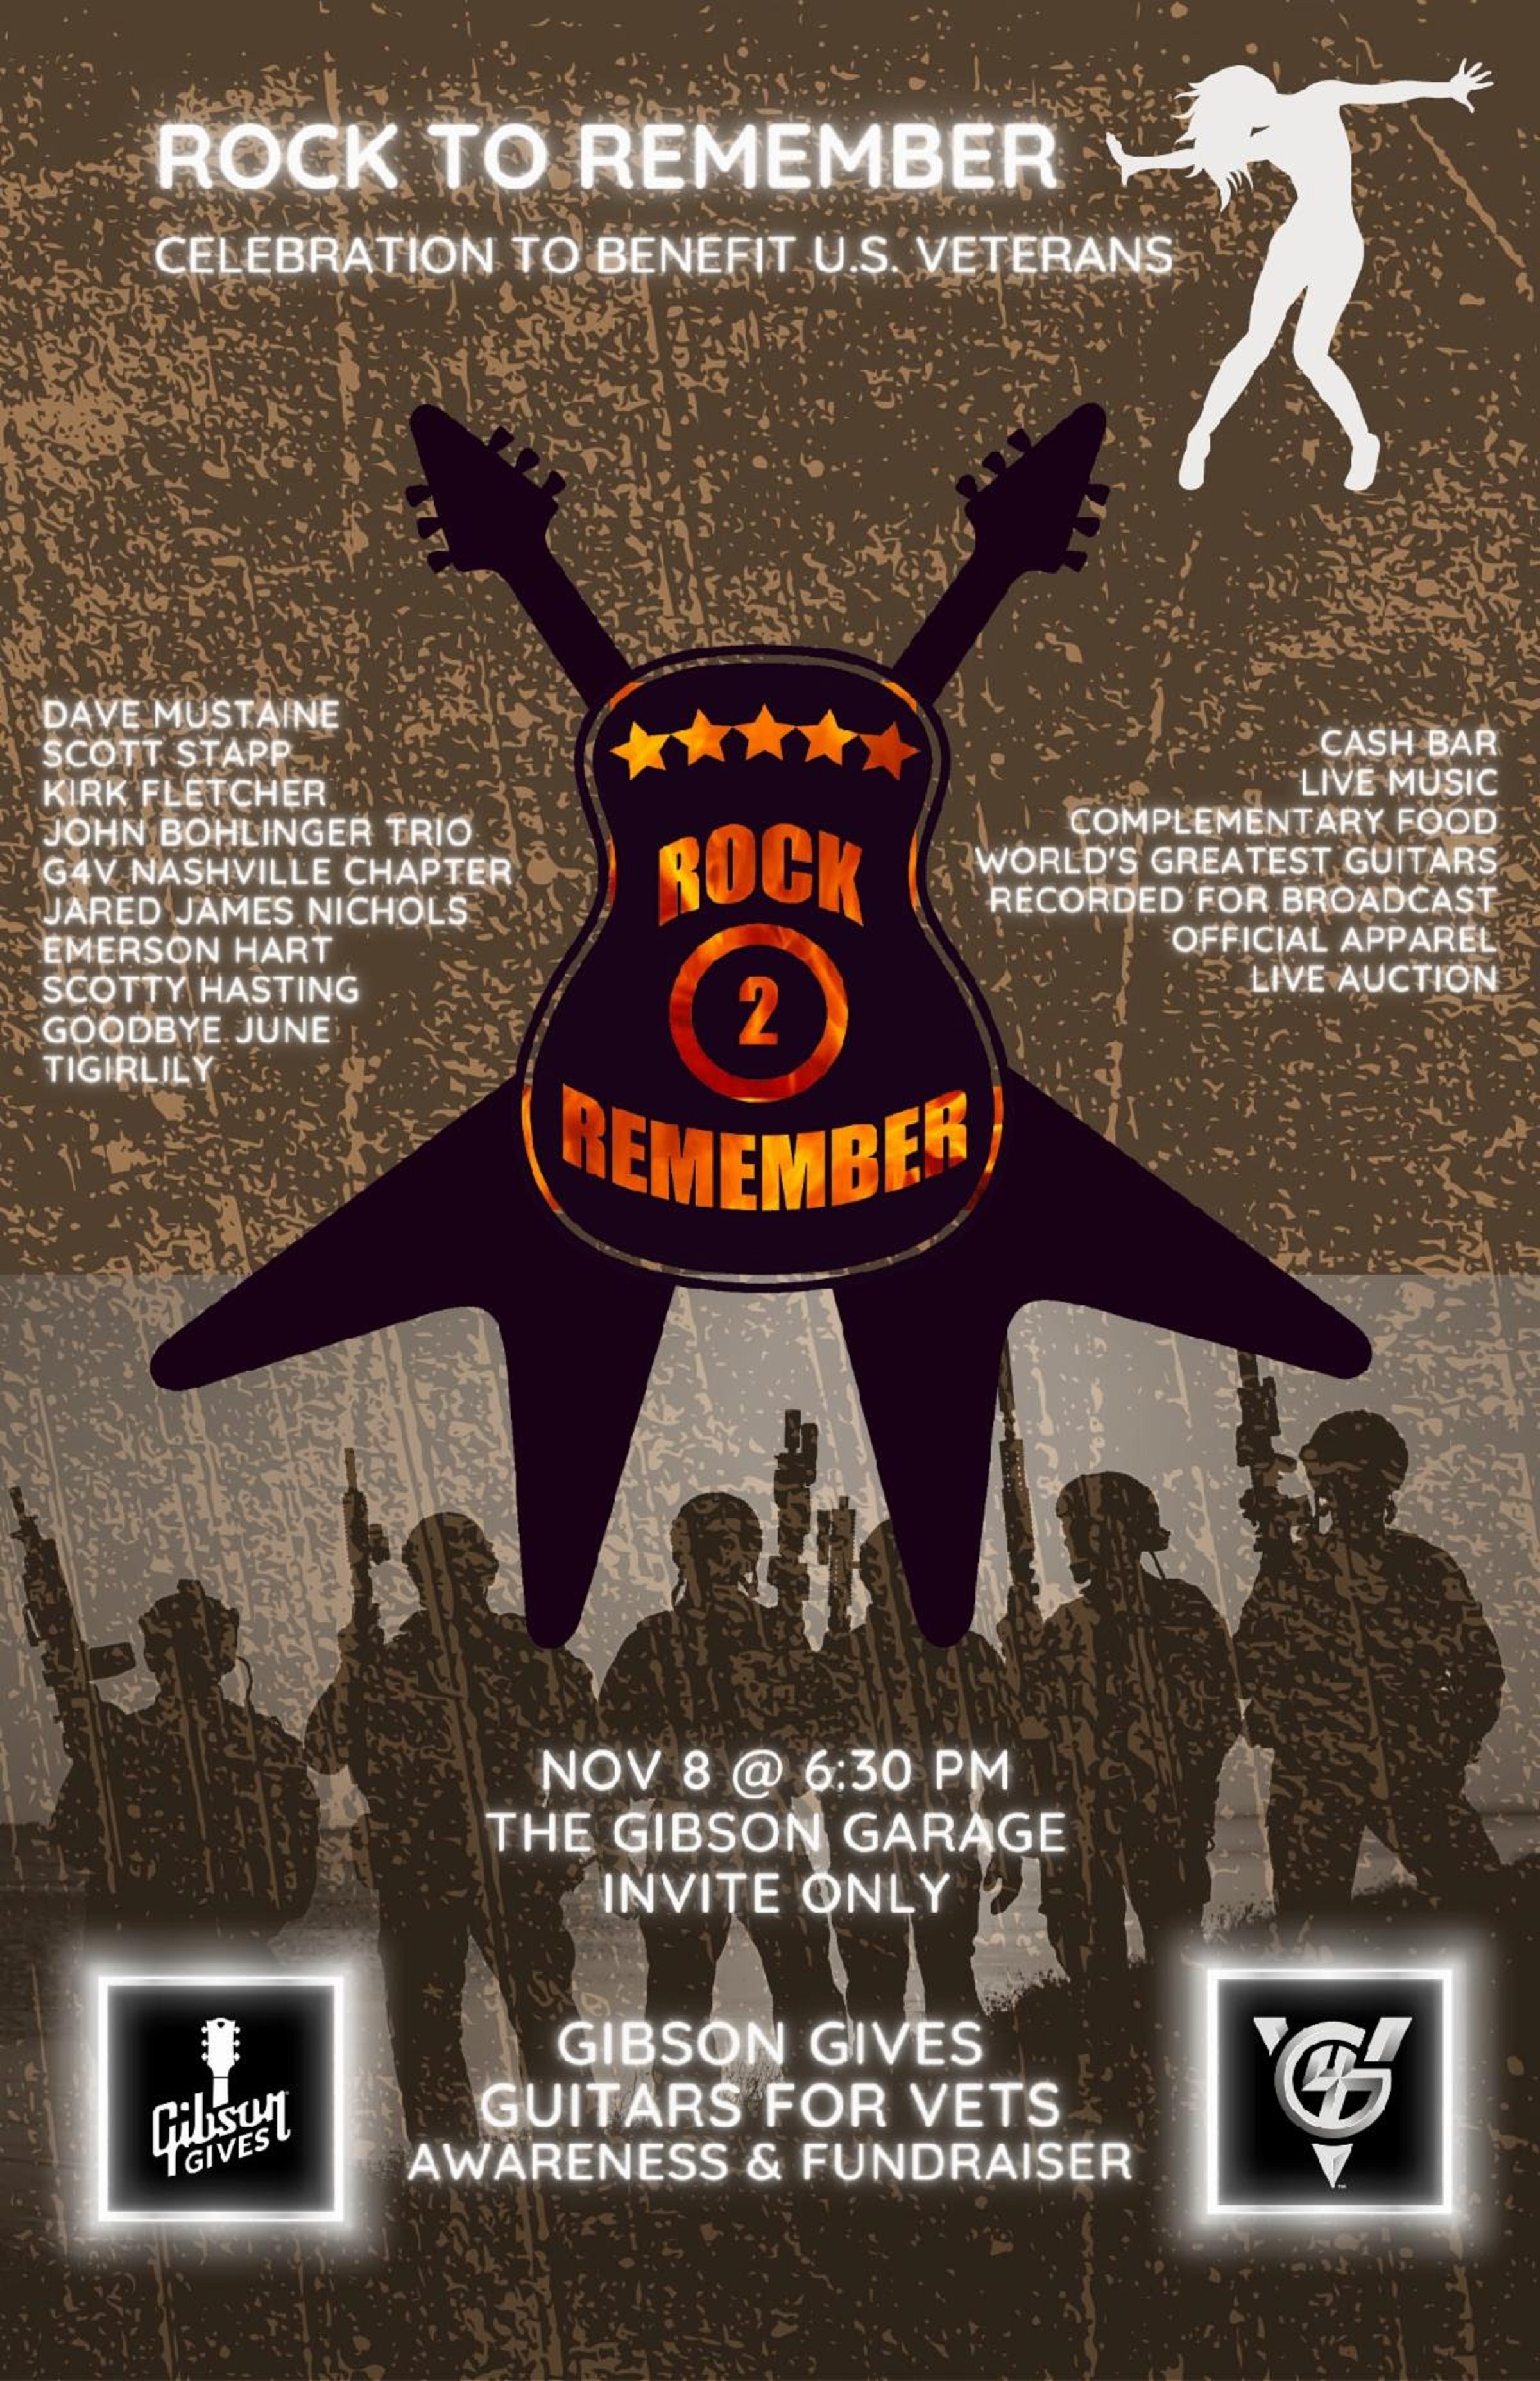 Gibson and Guitars For Vets Announce "Rock To Remember" Benefit Concert and Live Auction Set for Tuesday, Nov. 8 at the Gibson Garage